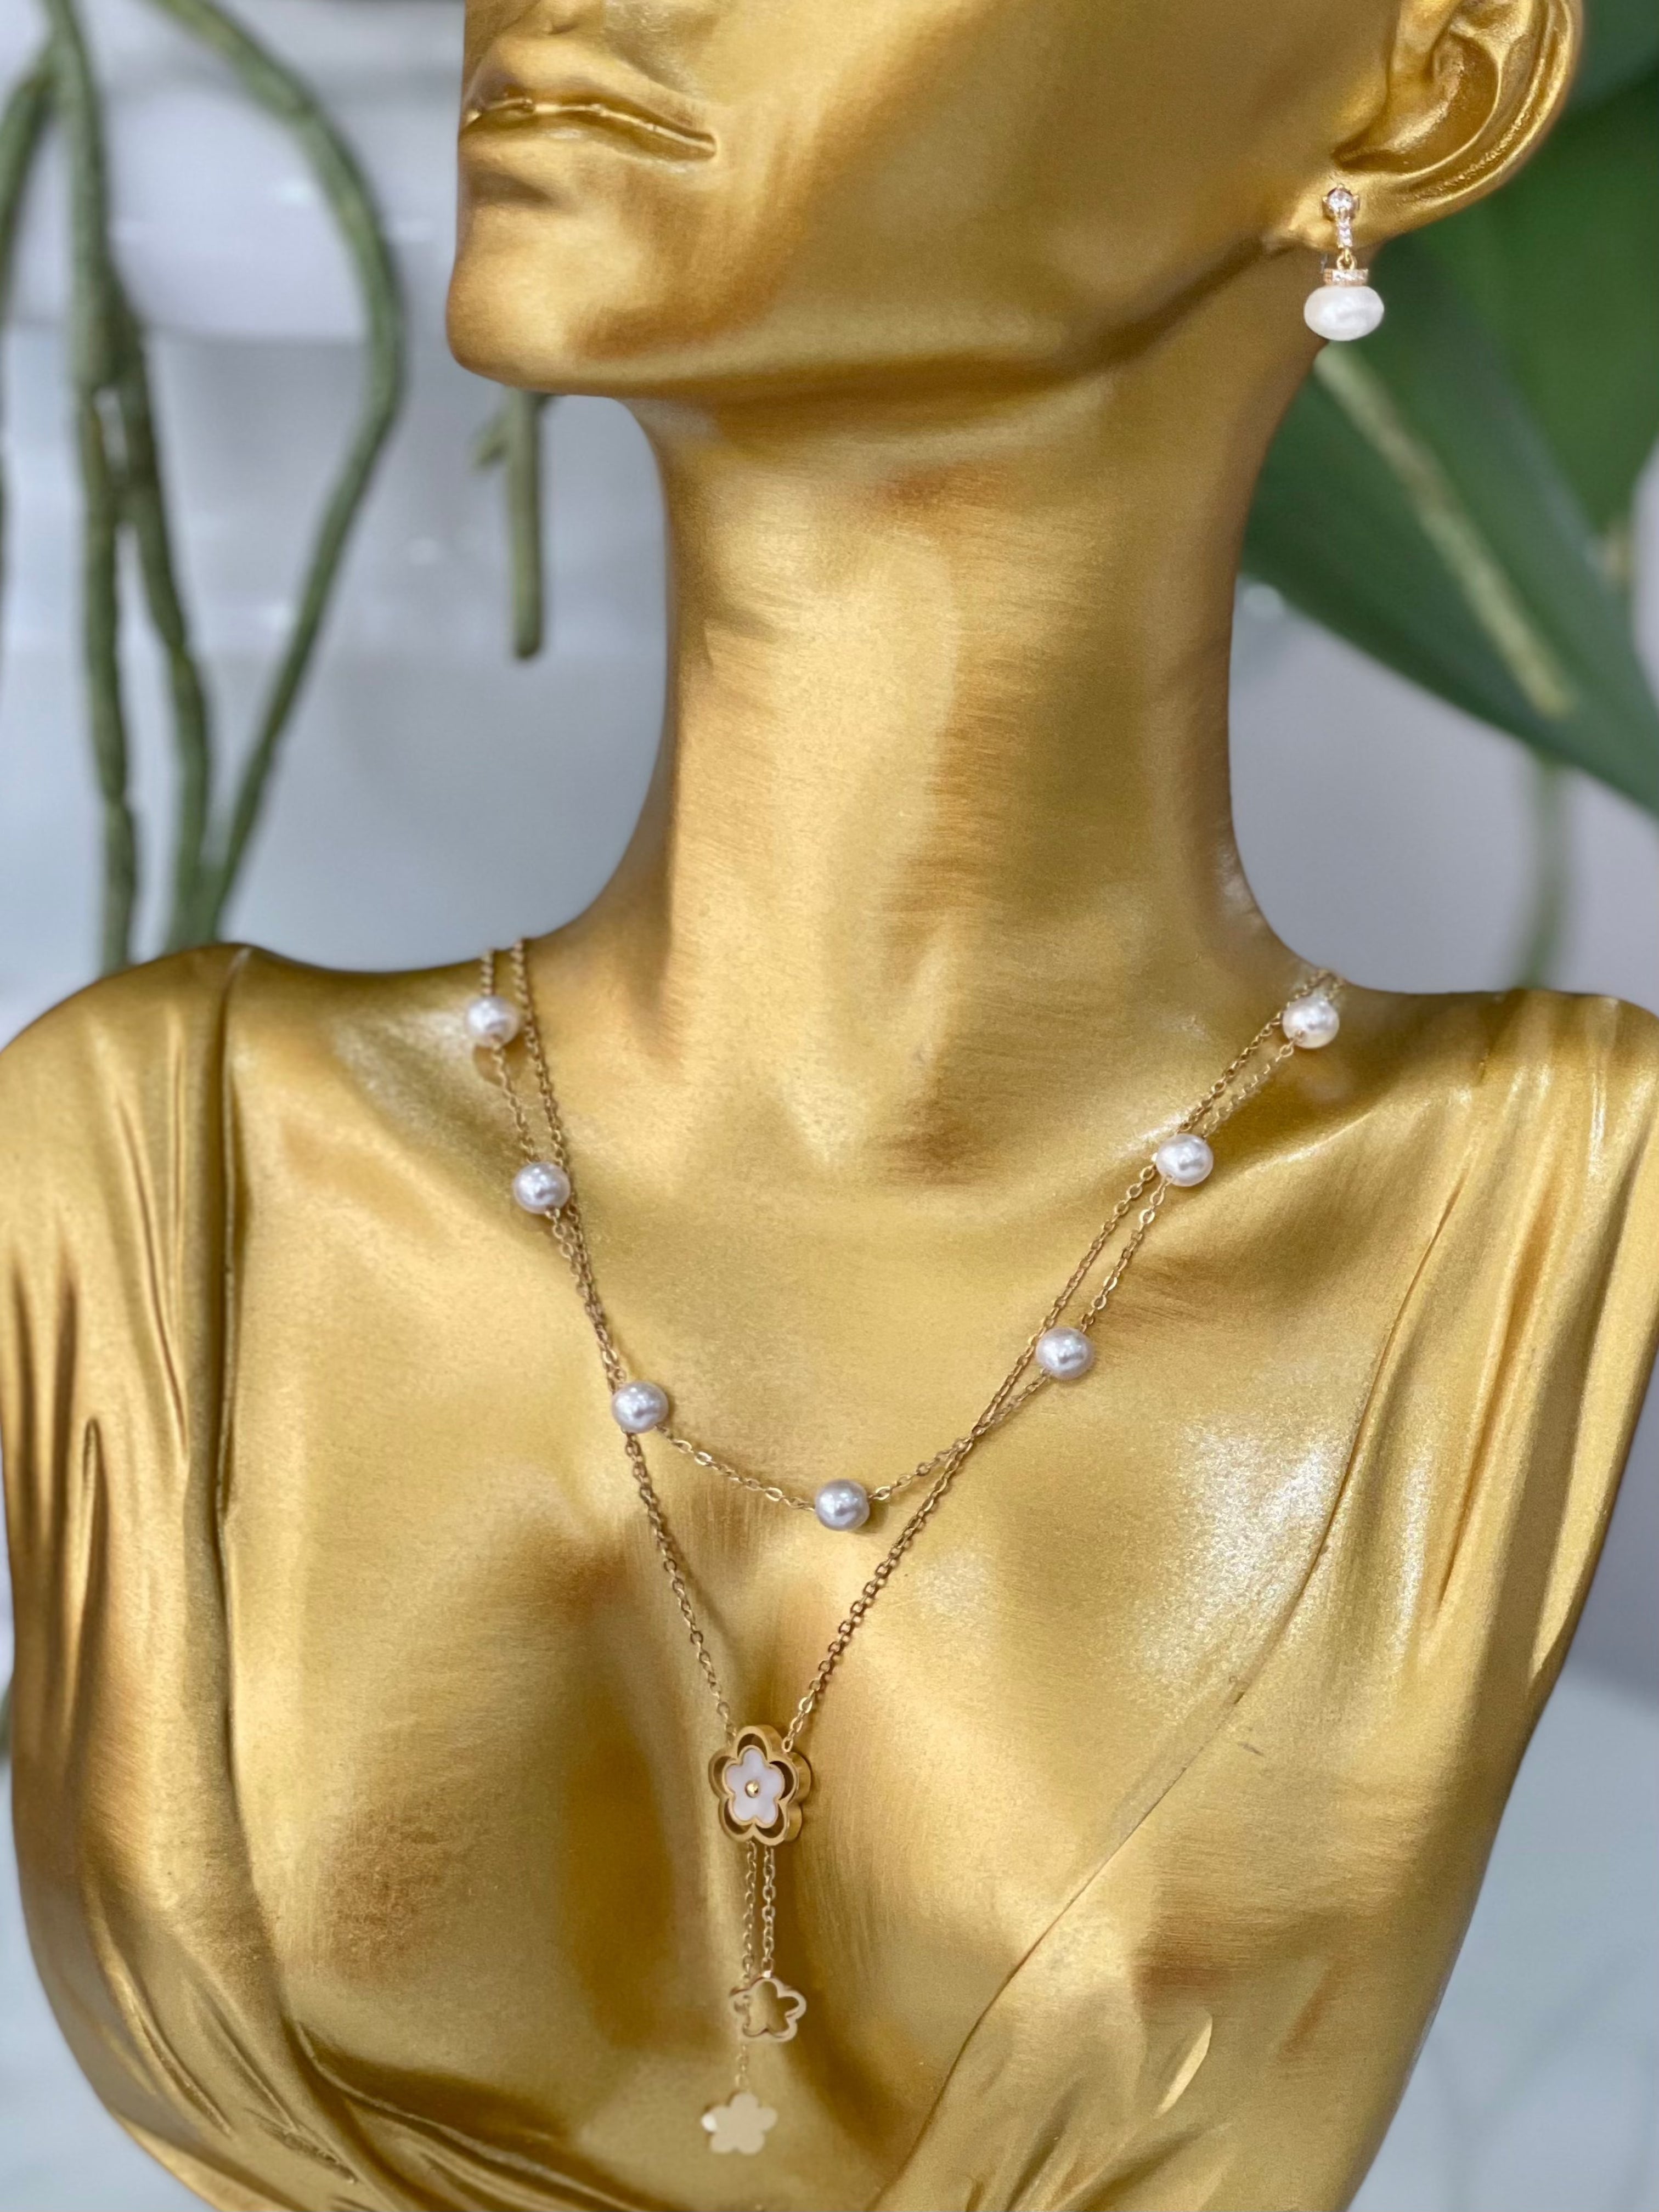 Gold Plated Double Chain Necklace with Pearl Detail and Flower Pendant